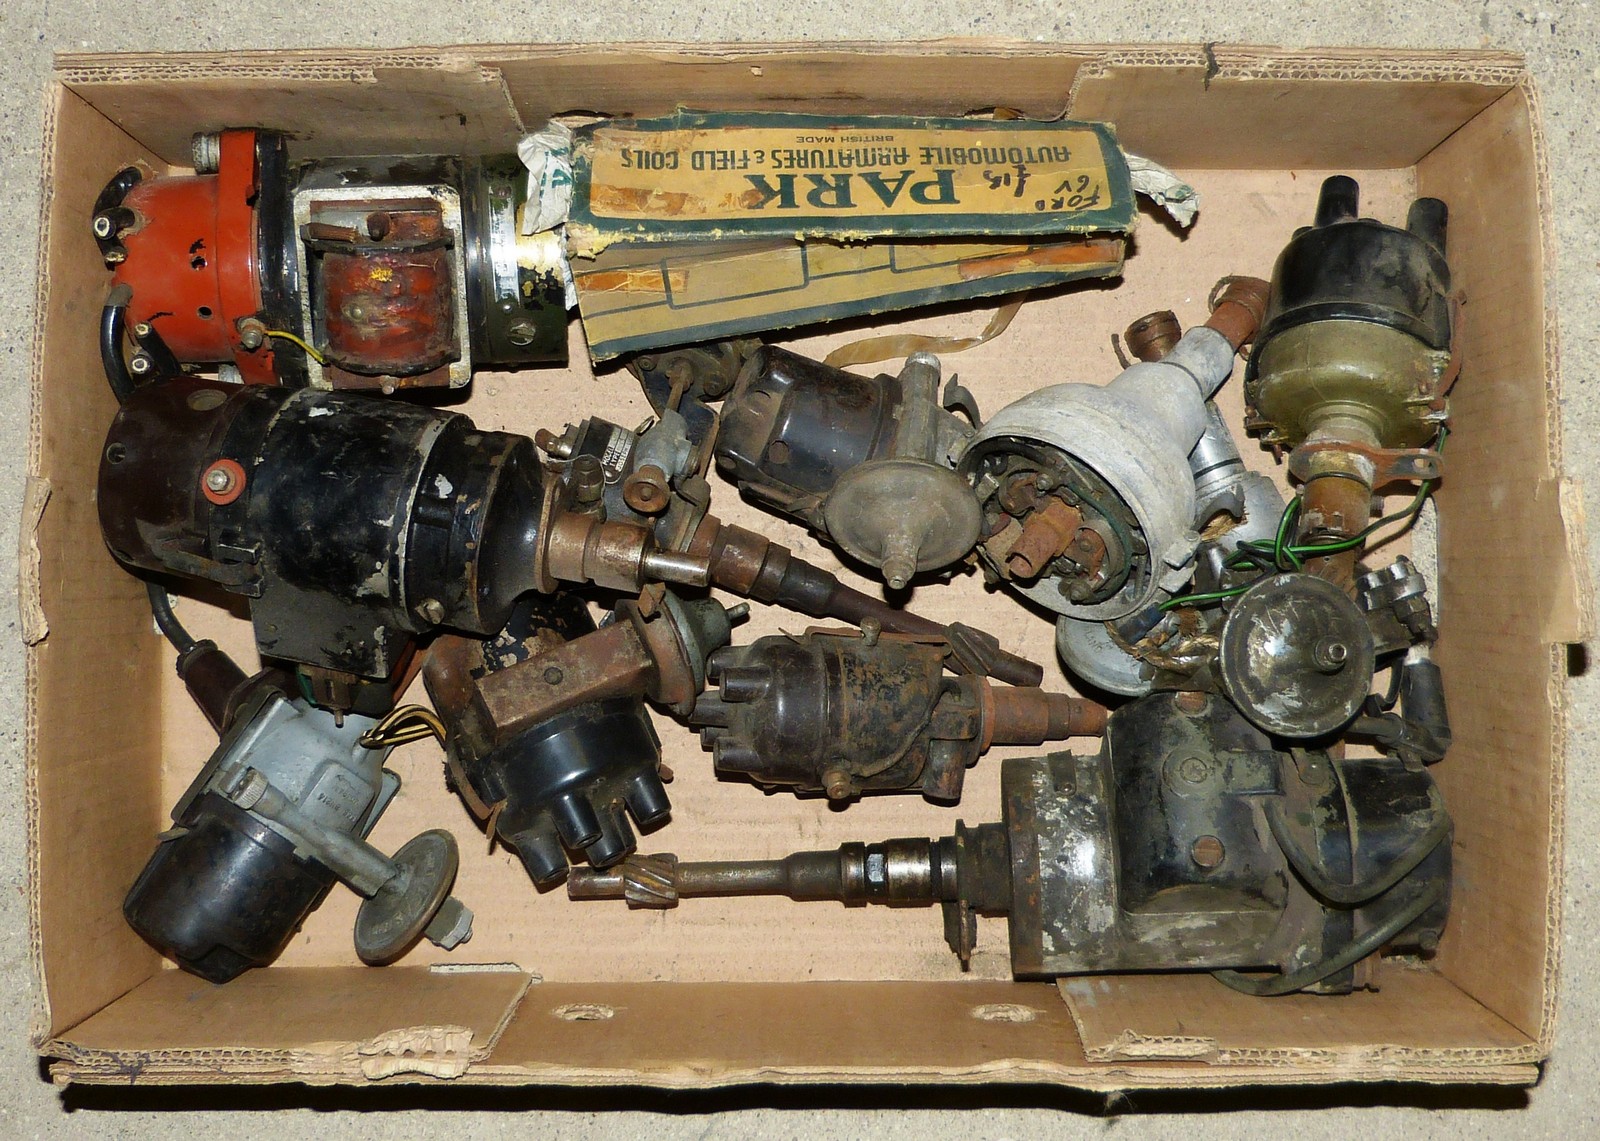 A quantity of used distributors of various sizes.